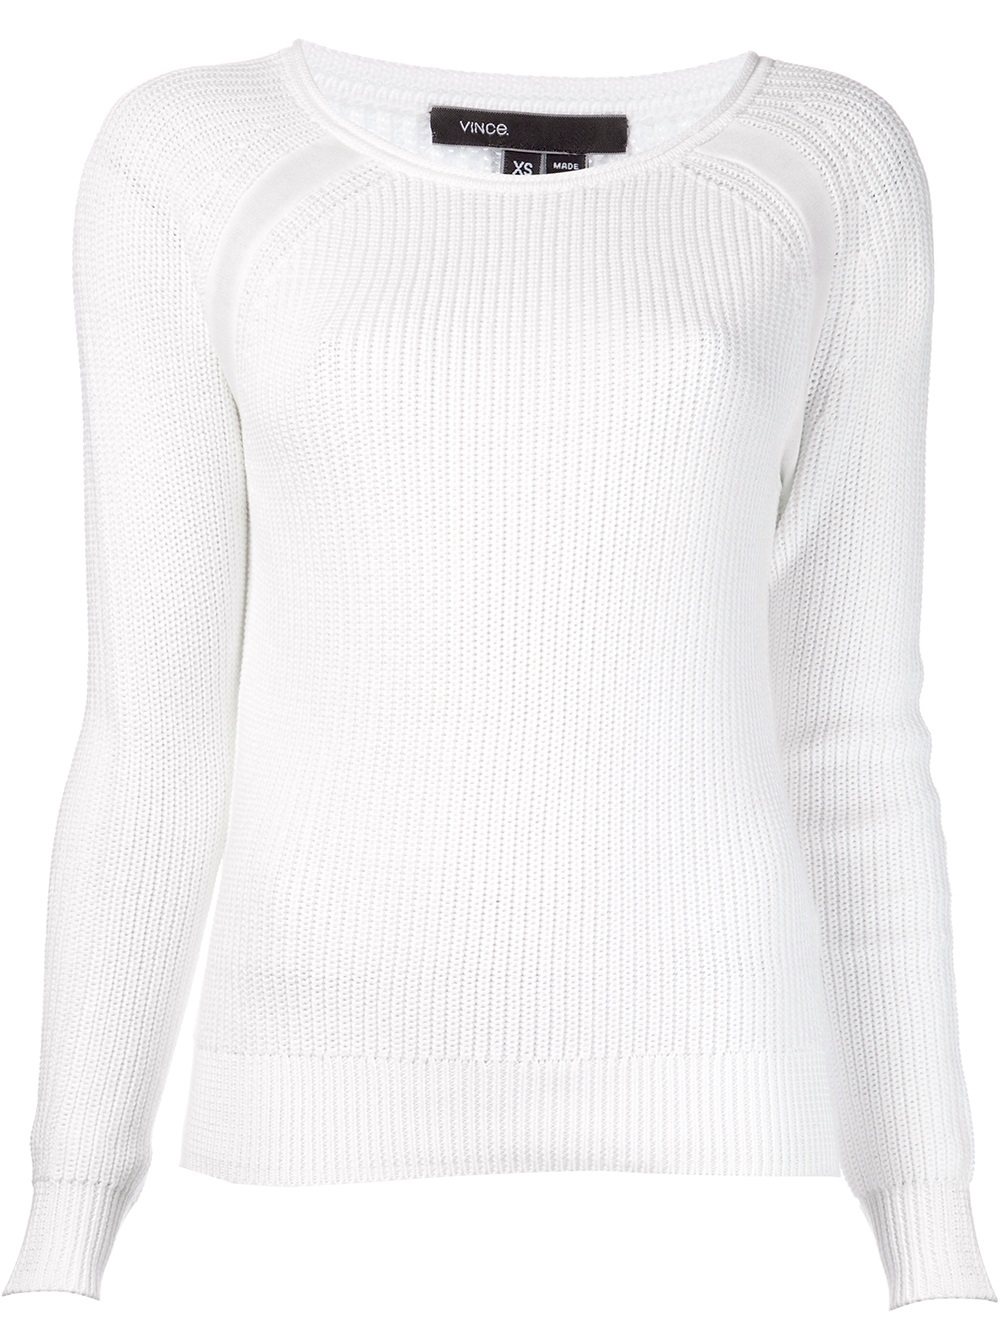 Lyst - Vince Raglan Pullover Sweater in White